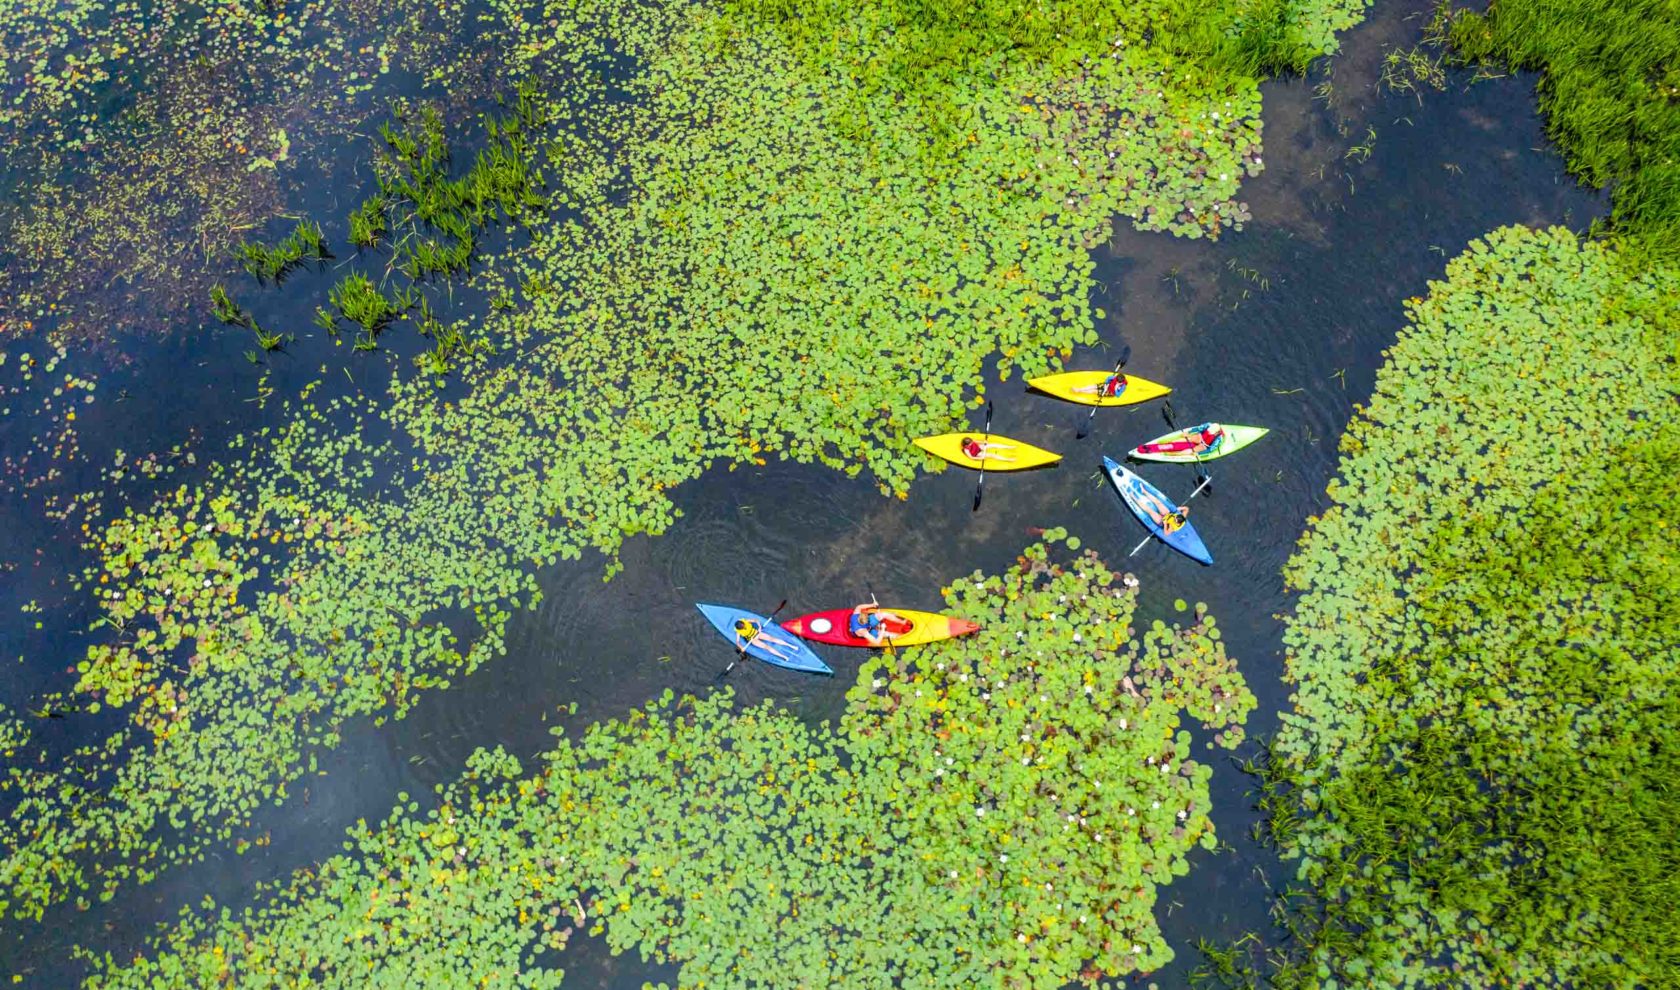 An aerial view of kayakers paddling through lily pads.